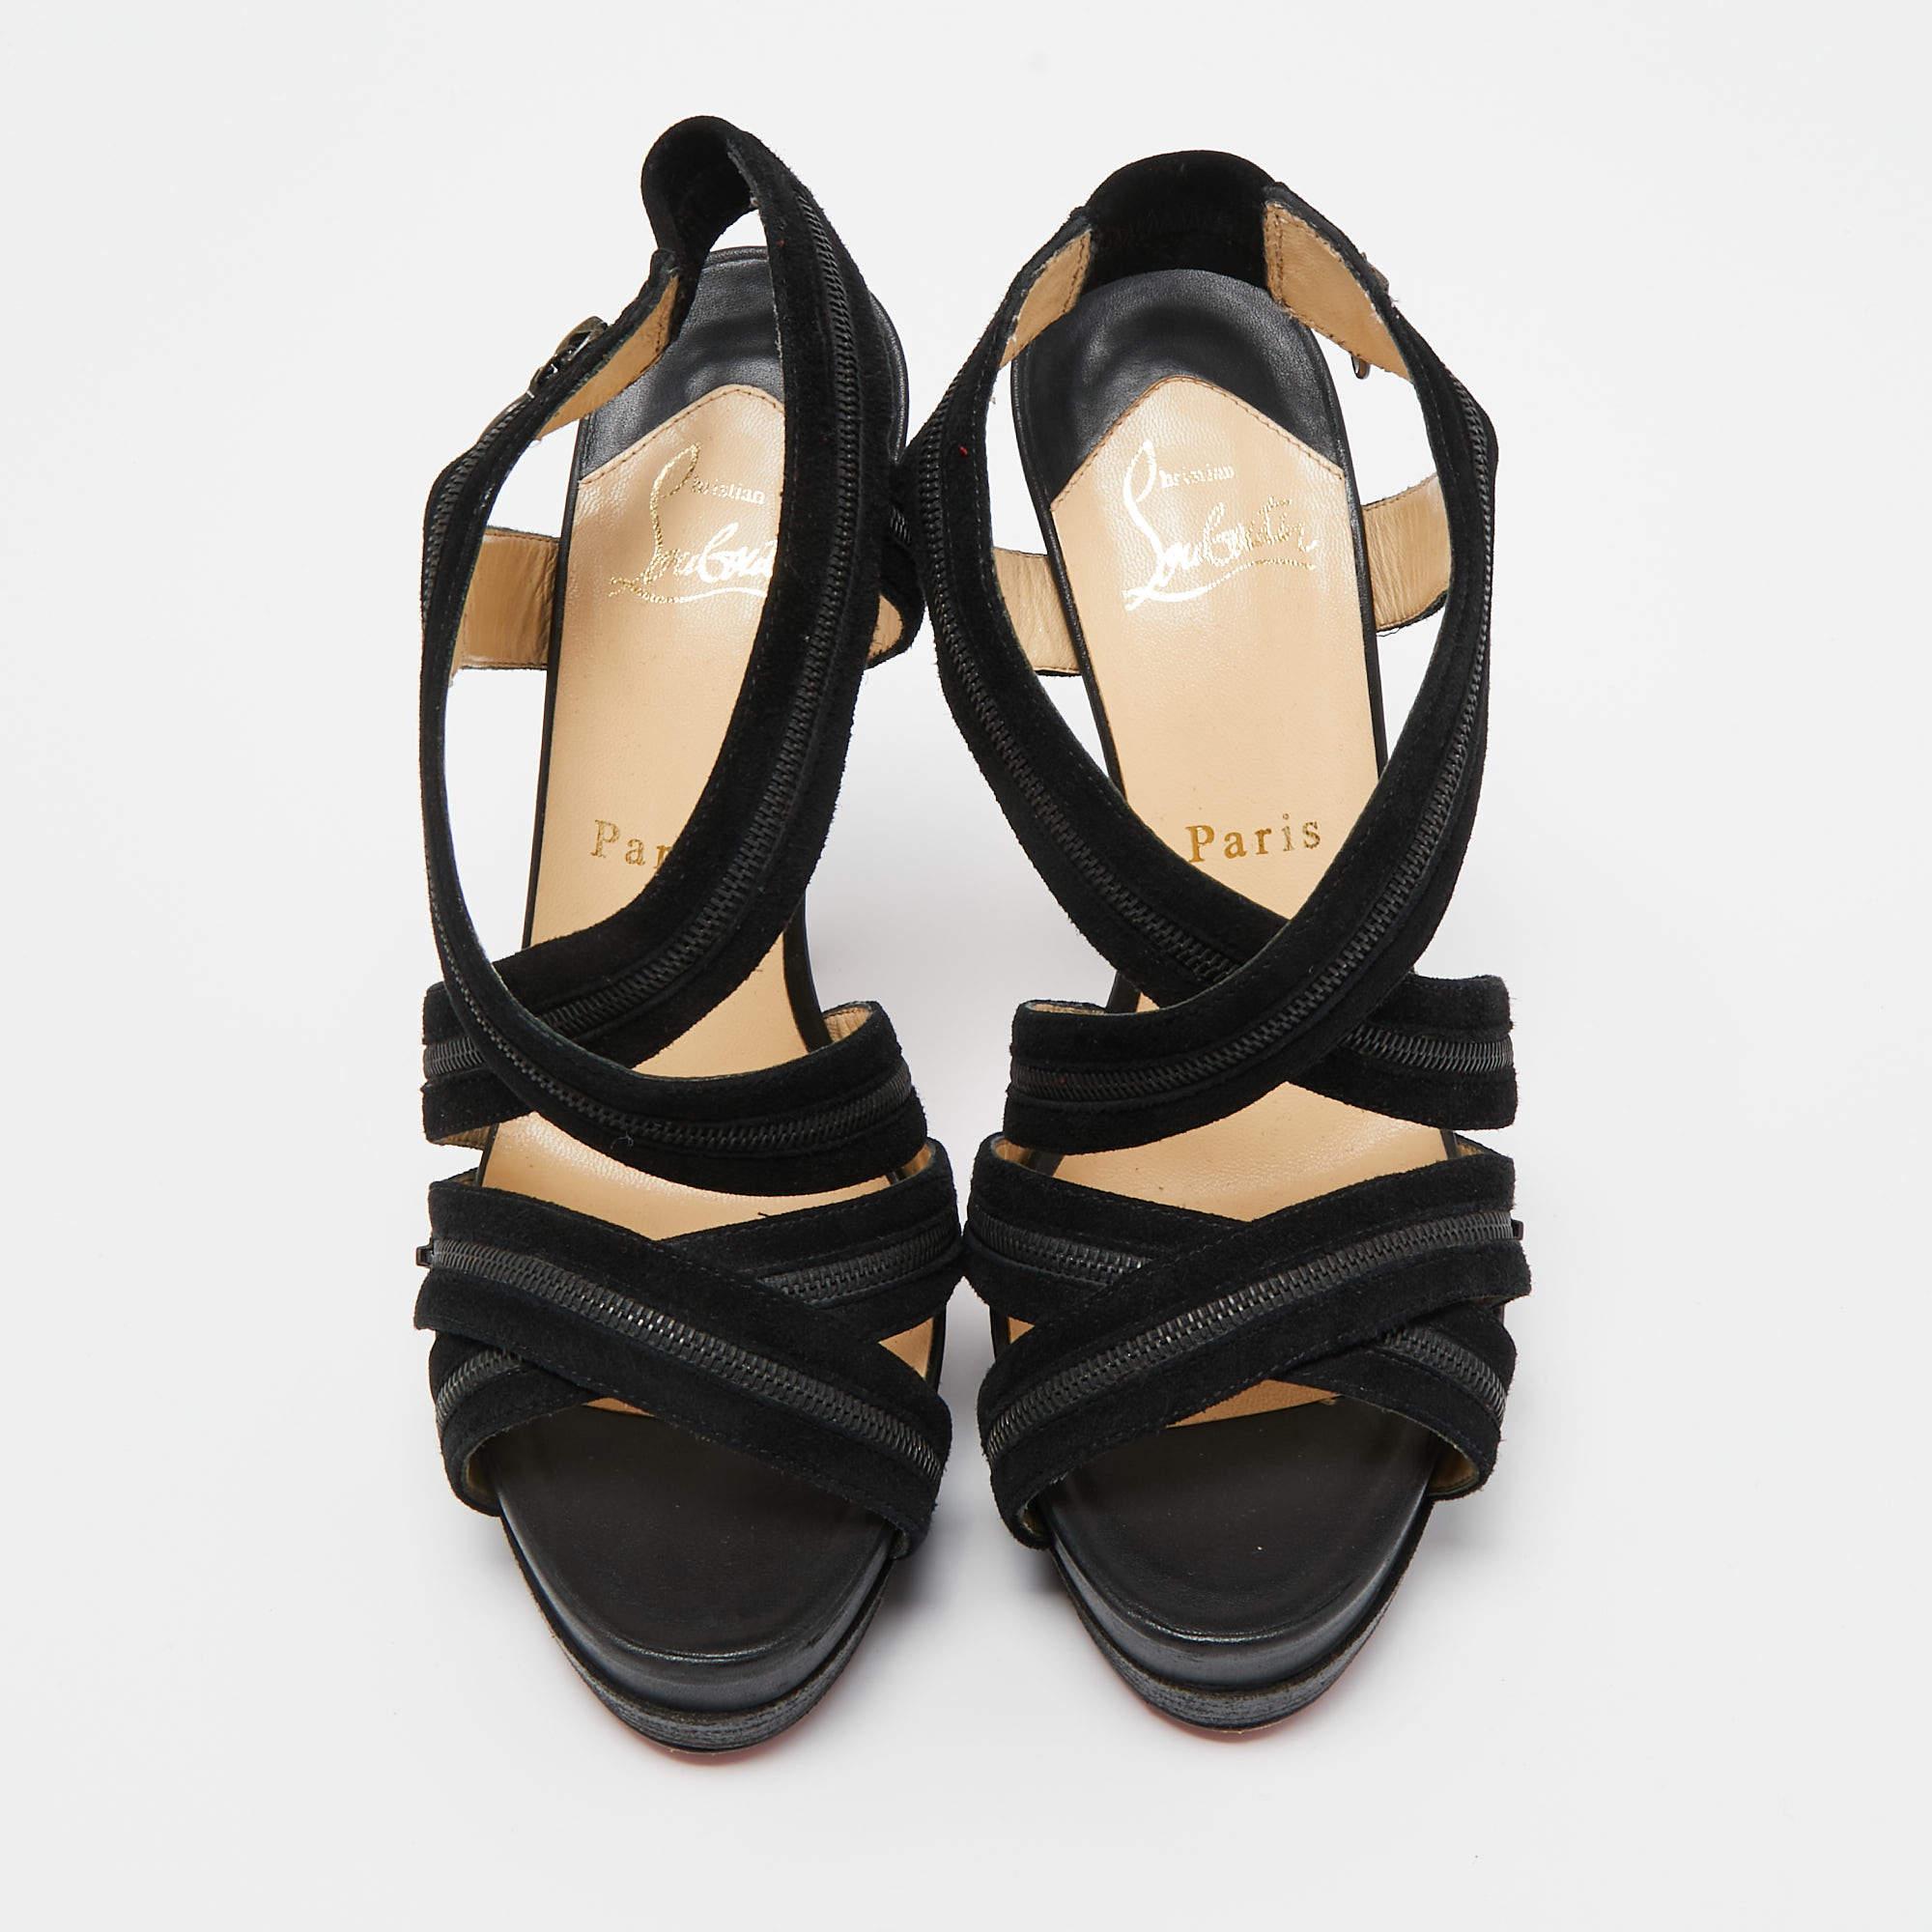 Introducing these stylish heeled sandals—the perfect addition to your footwear collection. With a comfortable yet elegant design, these sandals feature sturdy heels and supportive straps, making them ideal to wear for long hours. Step out in